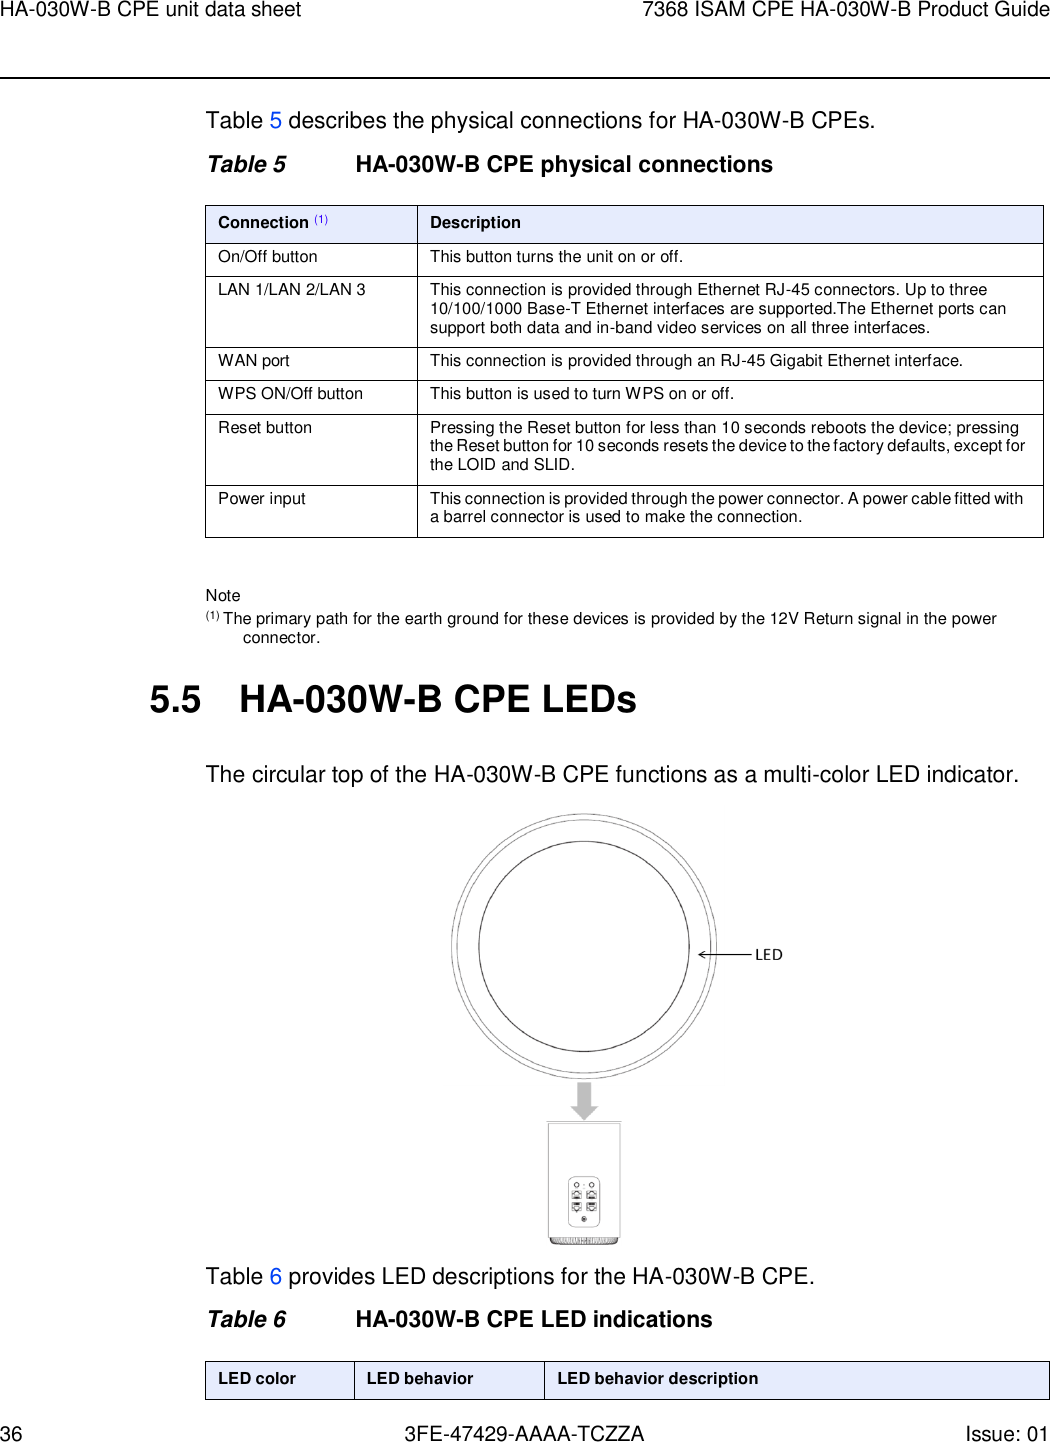 Page 36 of Nokia Bell HA030WB 7368 Intelligent Services Access Manager CPE User Manual 7368 ISAM CPE HA 020W A Product Guide